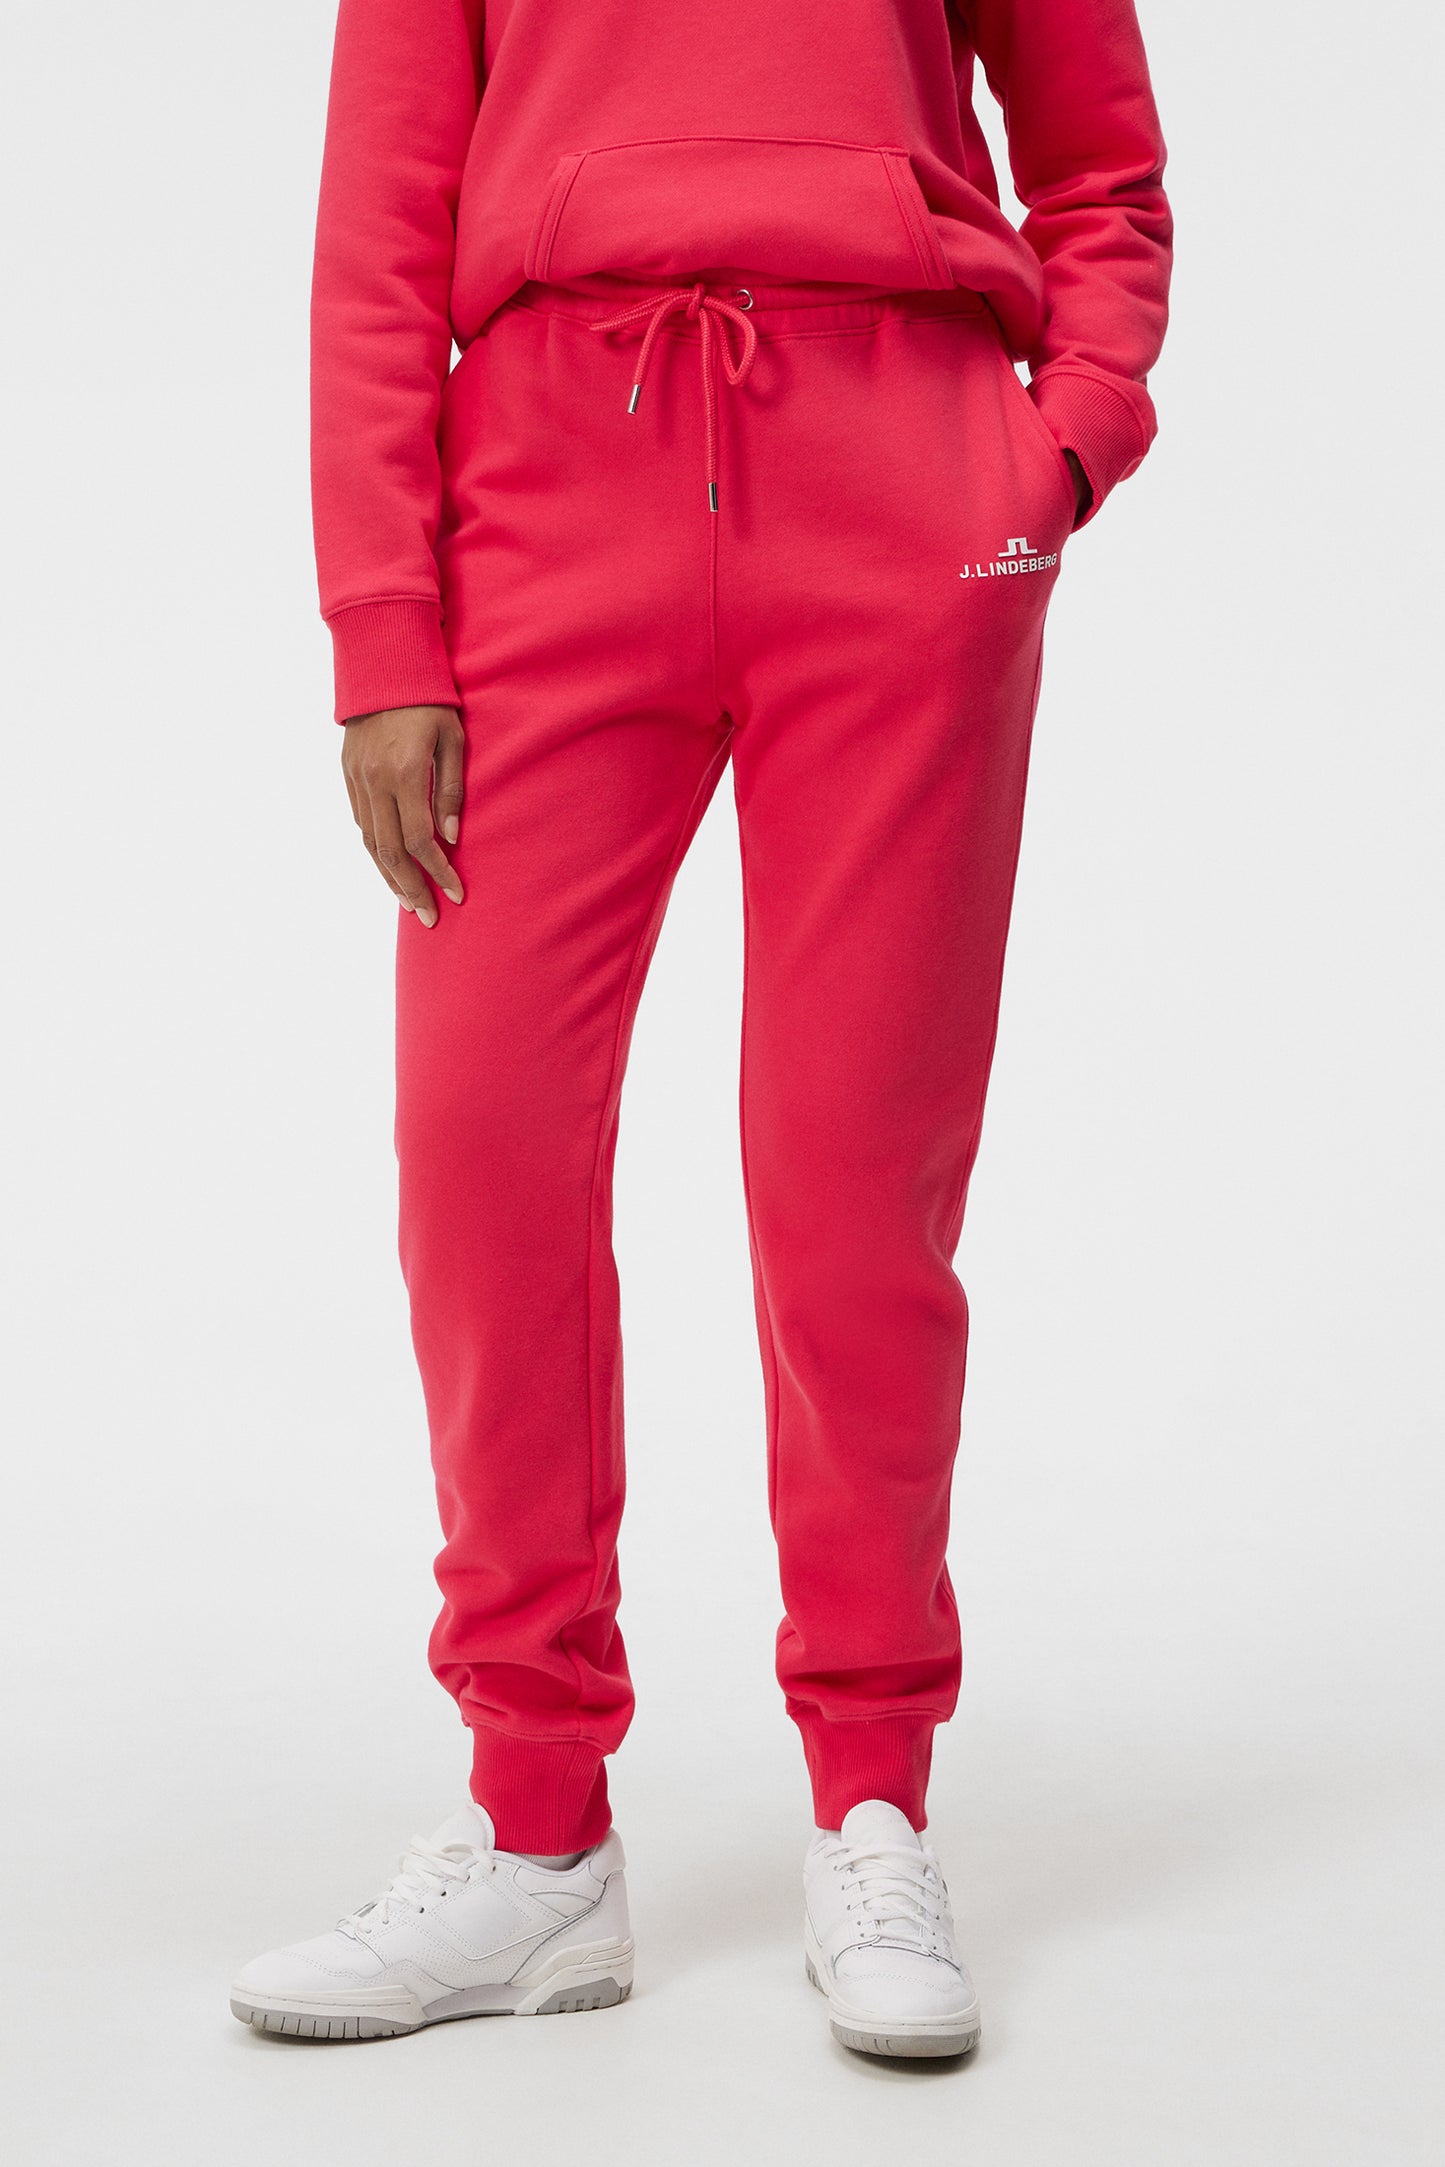 W Alpha Pant / Rose Red